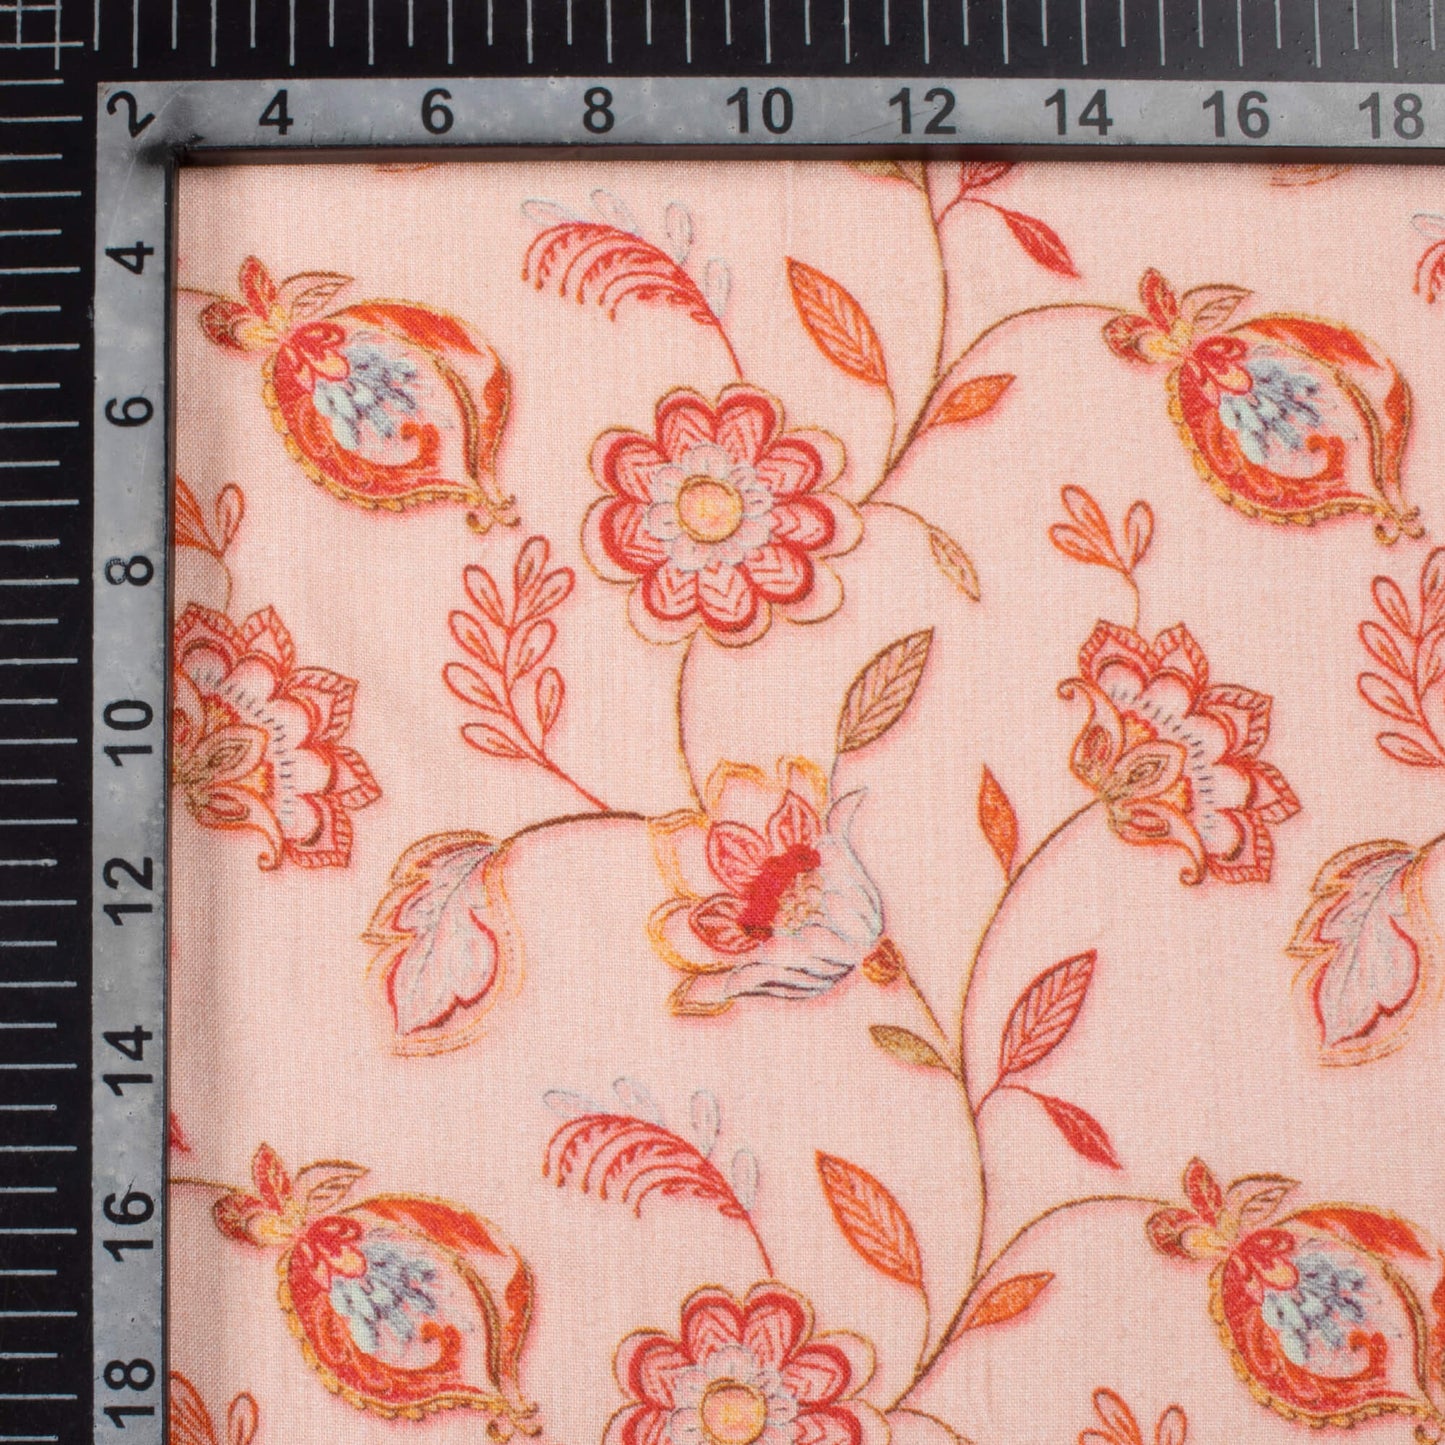 Pastel Peach And Red Floral Pattern Digital Print Viscose Rayon Fabric (Width 58 Inches)